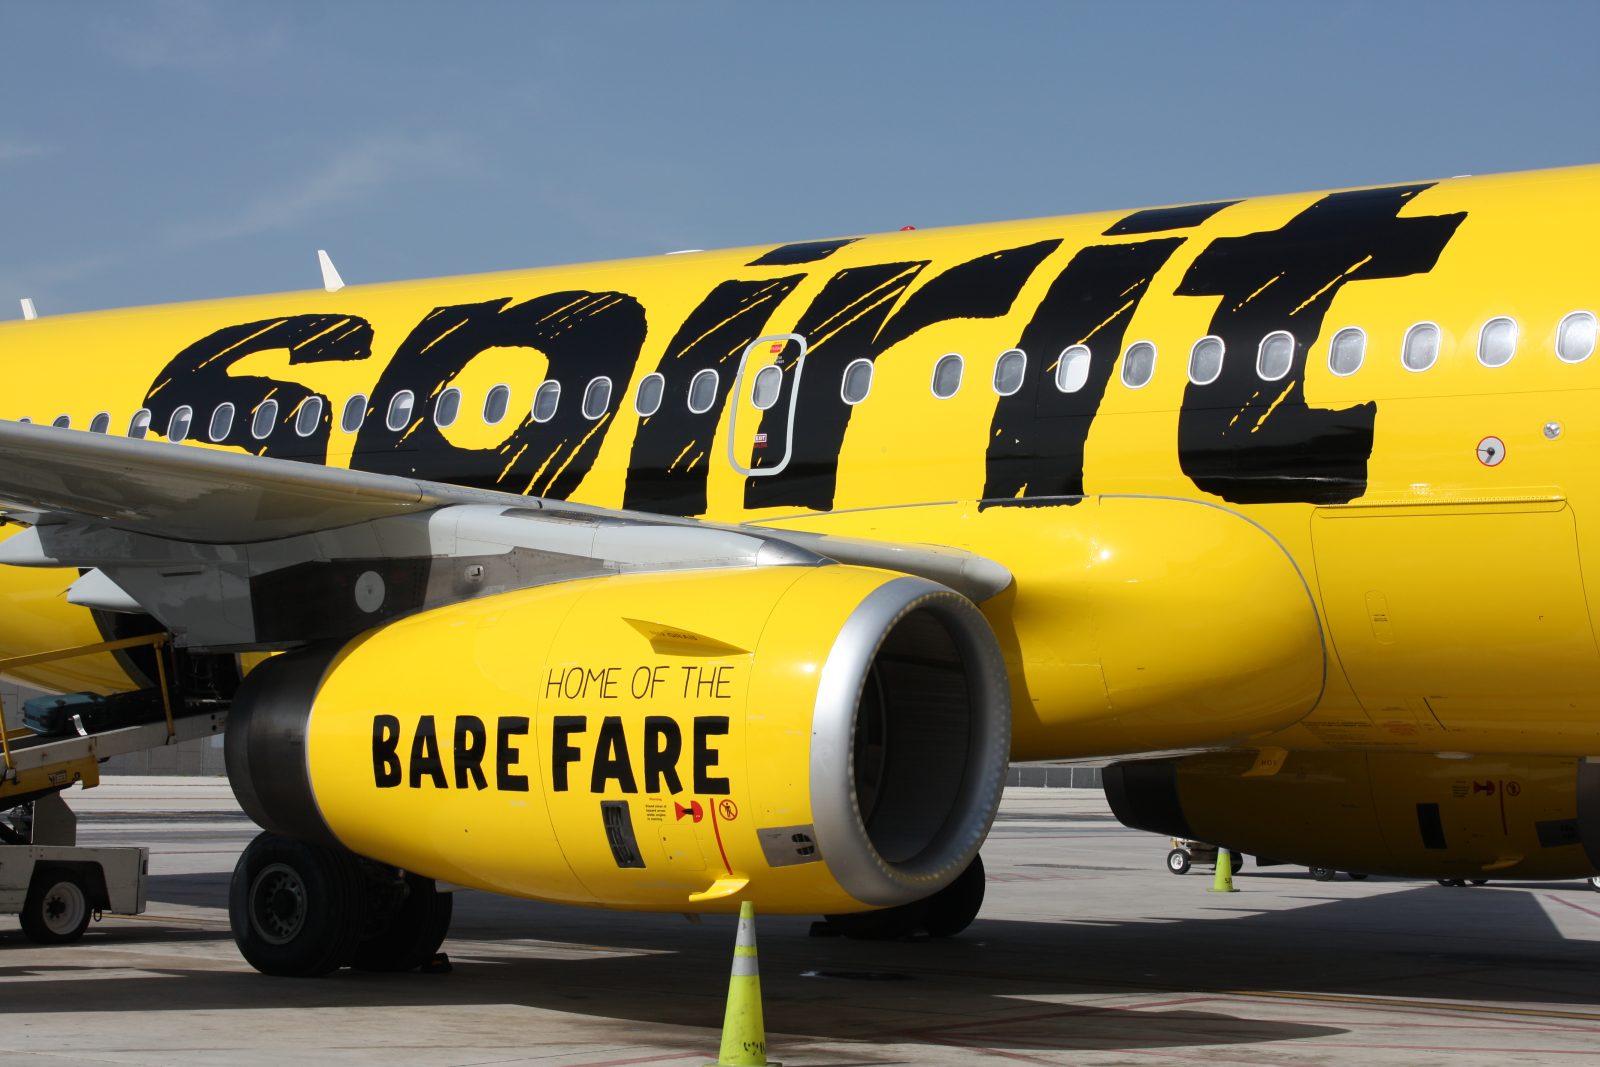 It turns out that fares on Spirit Airlines are always cheaper when booked direct than via price comparsion websites. Photo Credit: Spirit Airlines